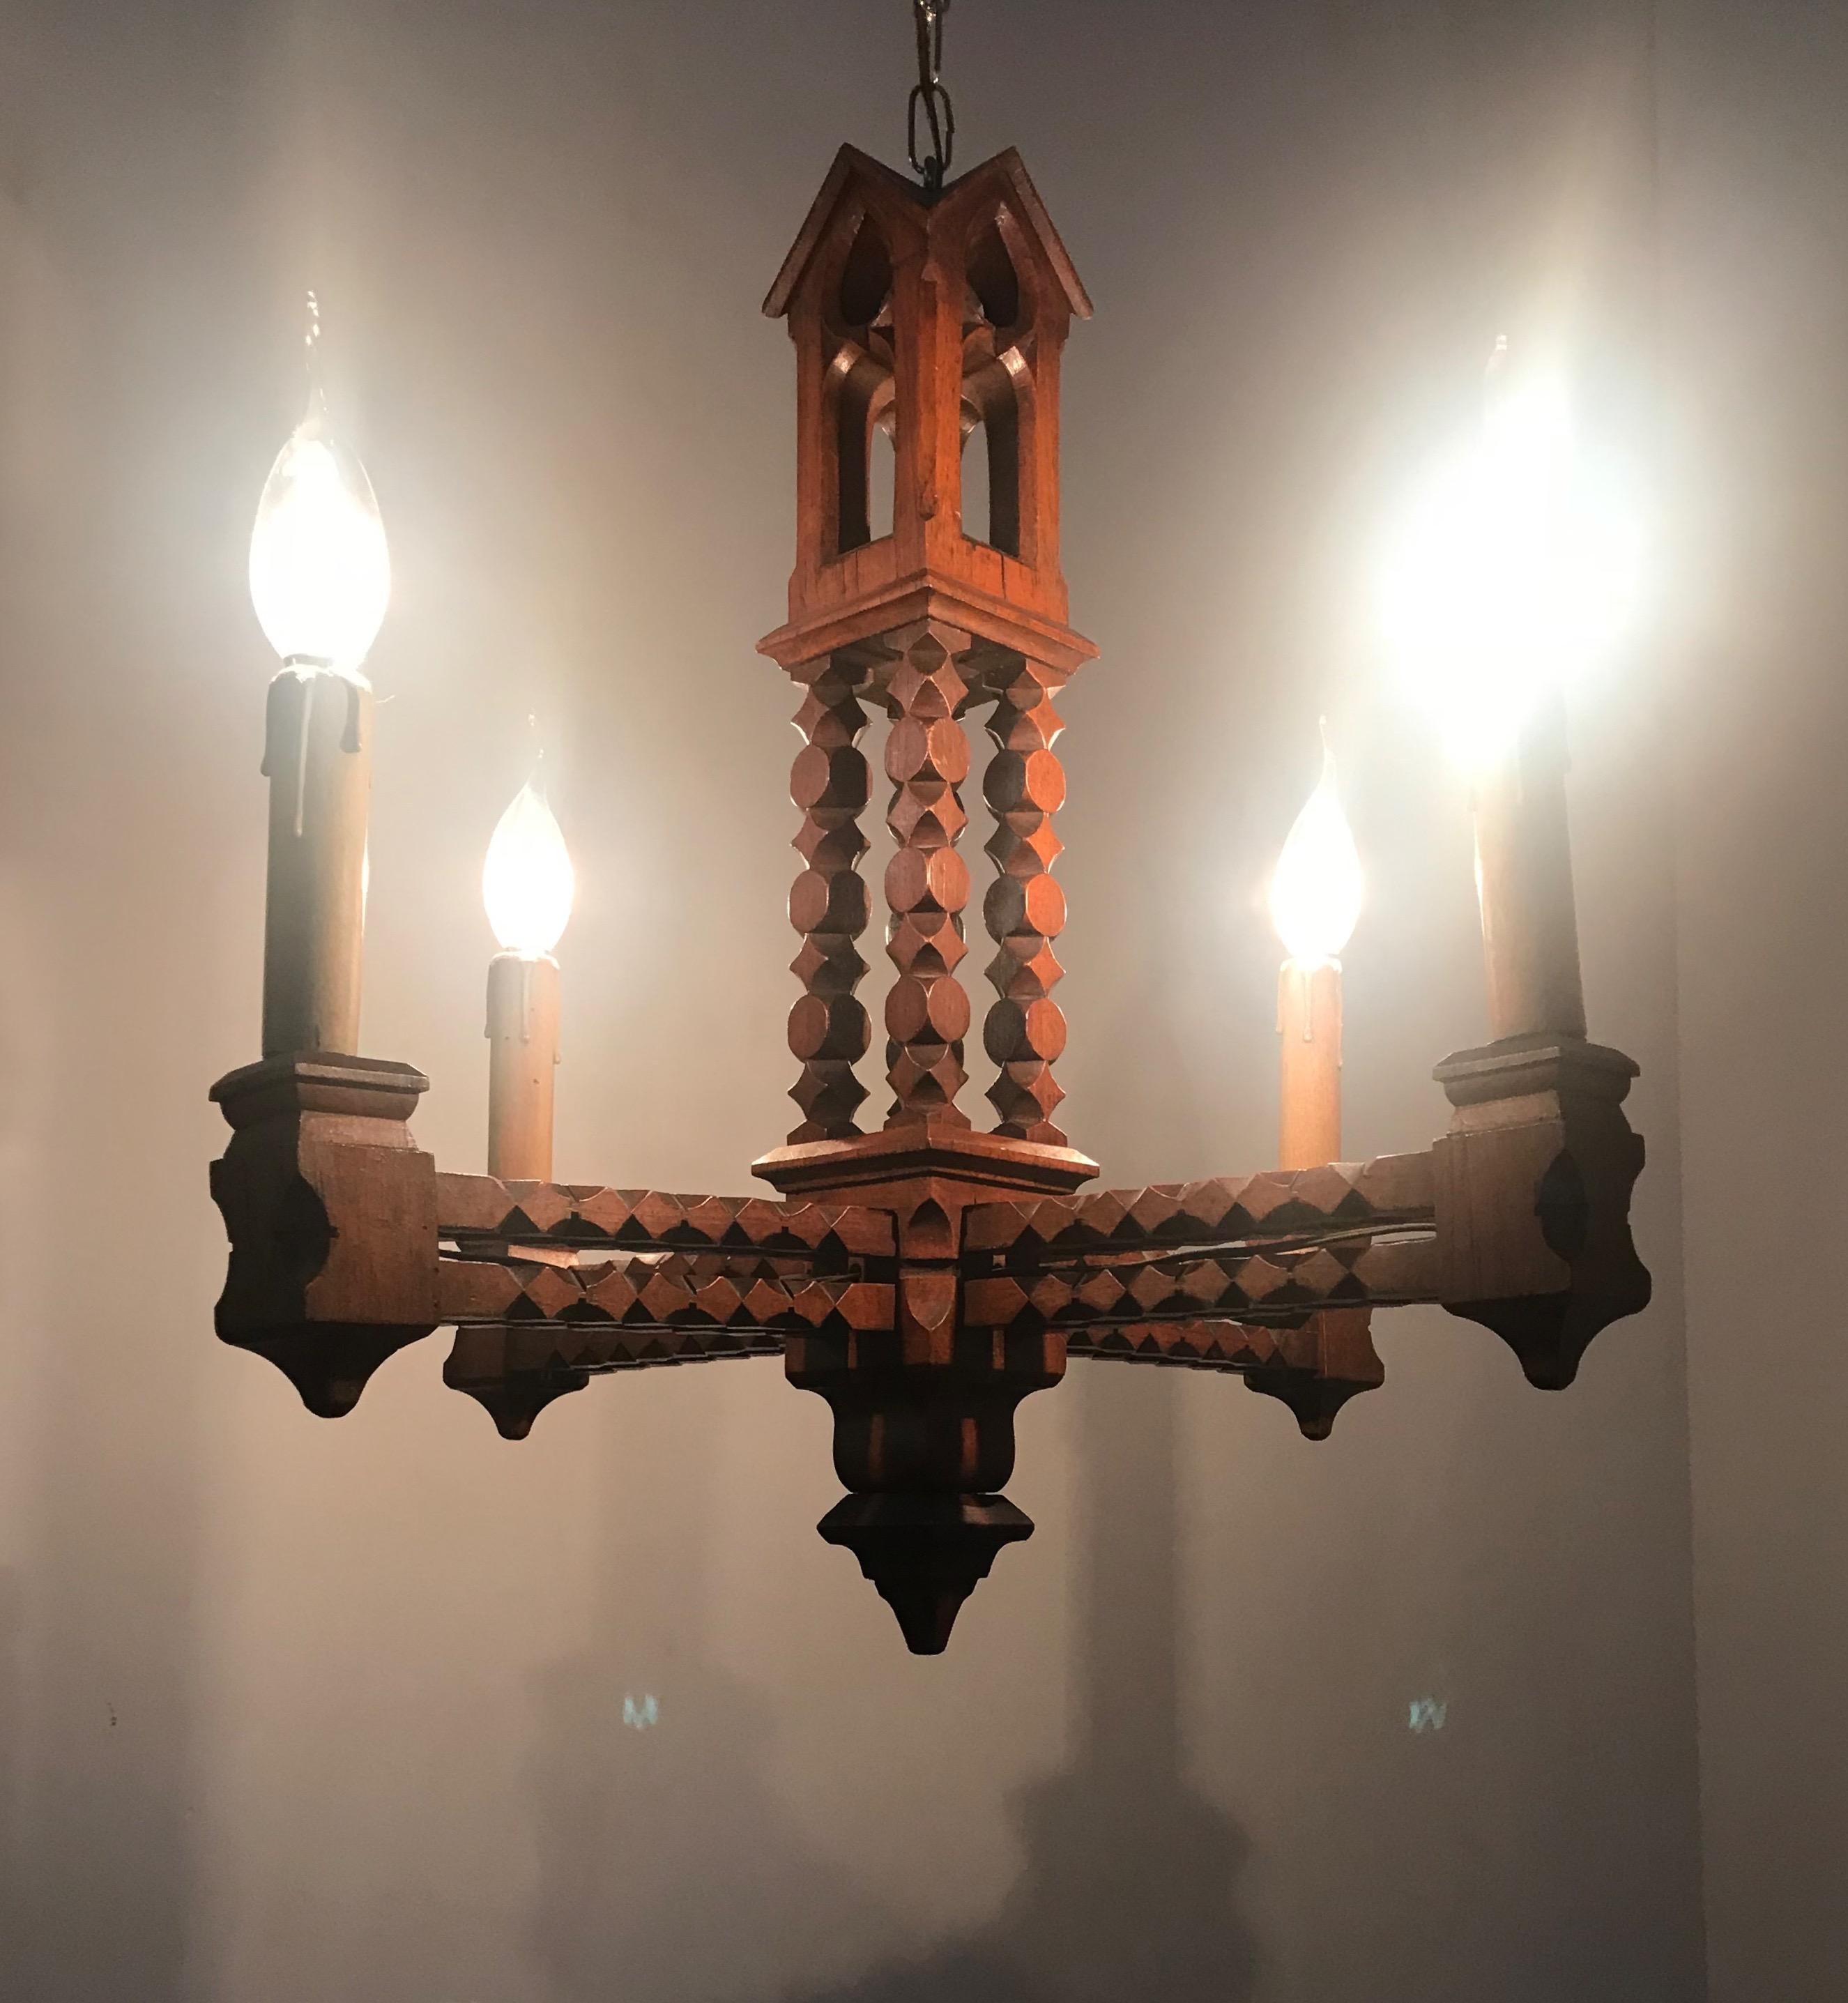 Rare Gothic Revival chapel shape light fixture.

For the collectors and enthousiasts of rare Gothic Revival antiques we also have this beautiful and all-handcrafted, wooden light fixture. This well carved elmwood specimen from circa 1900 with its